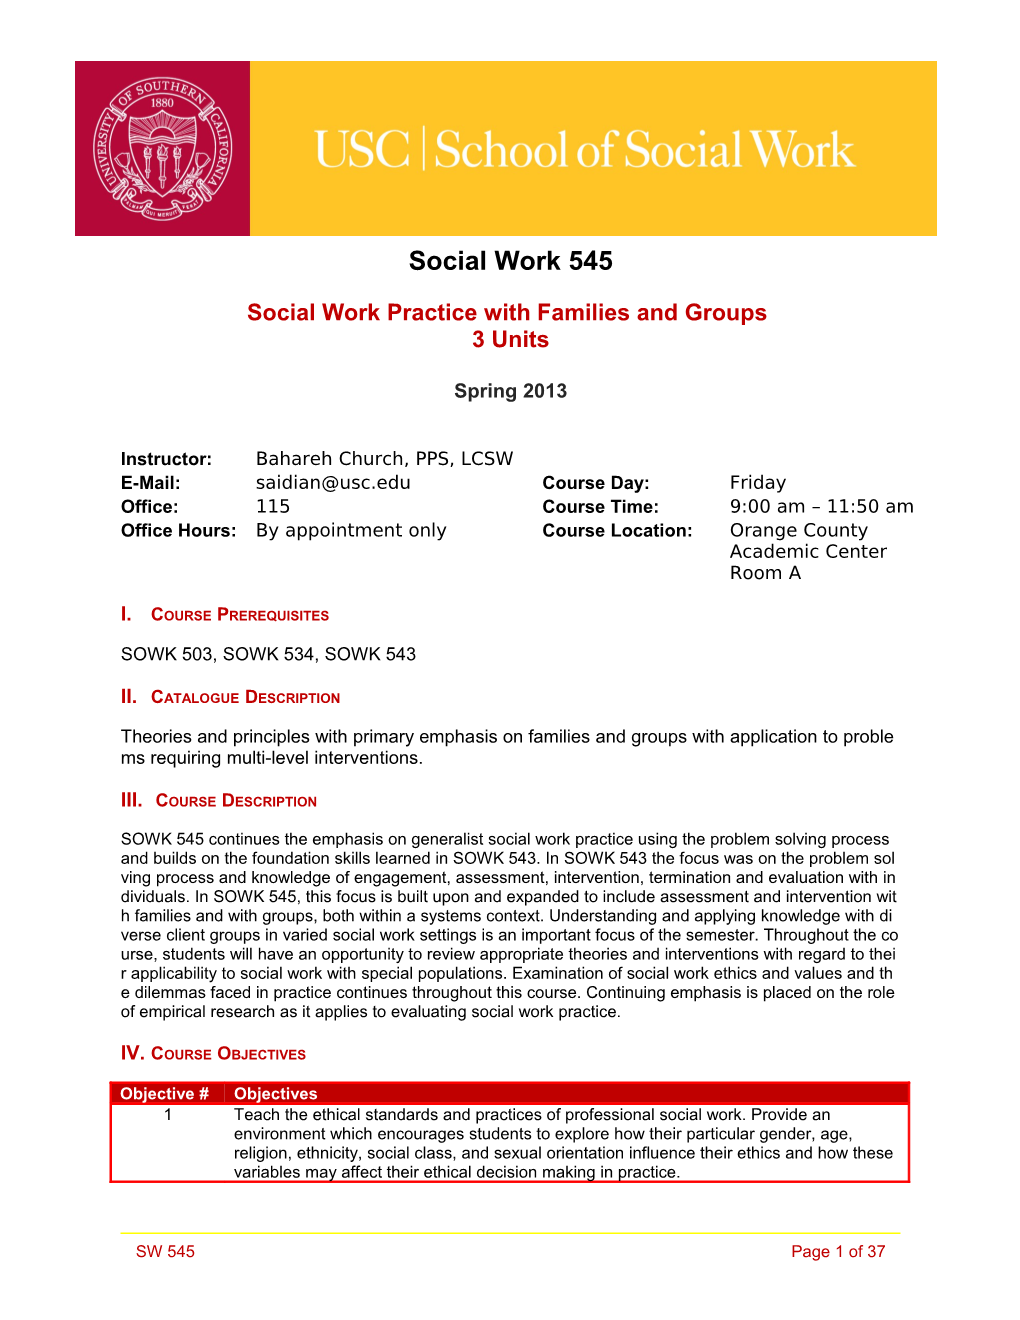 School of Social Work Syllabus Template Guide s18